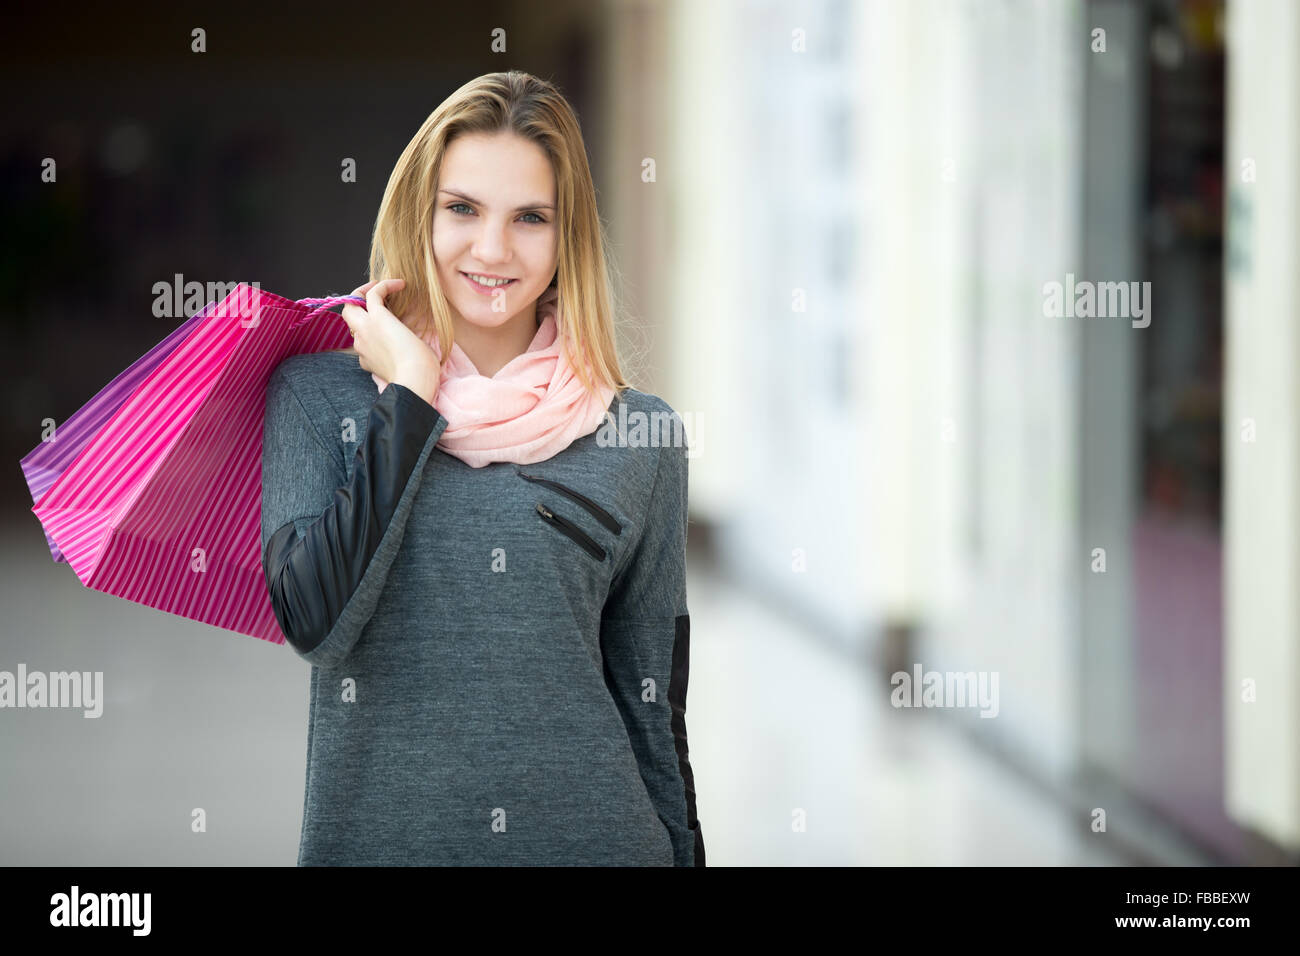 Smiling good-looking teenage girl on shopping, walking in supermarket with paper bags, copyspace Stock Photo